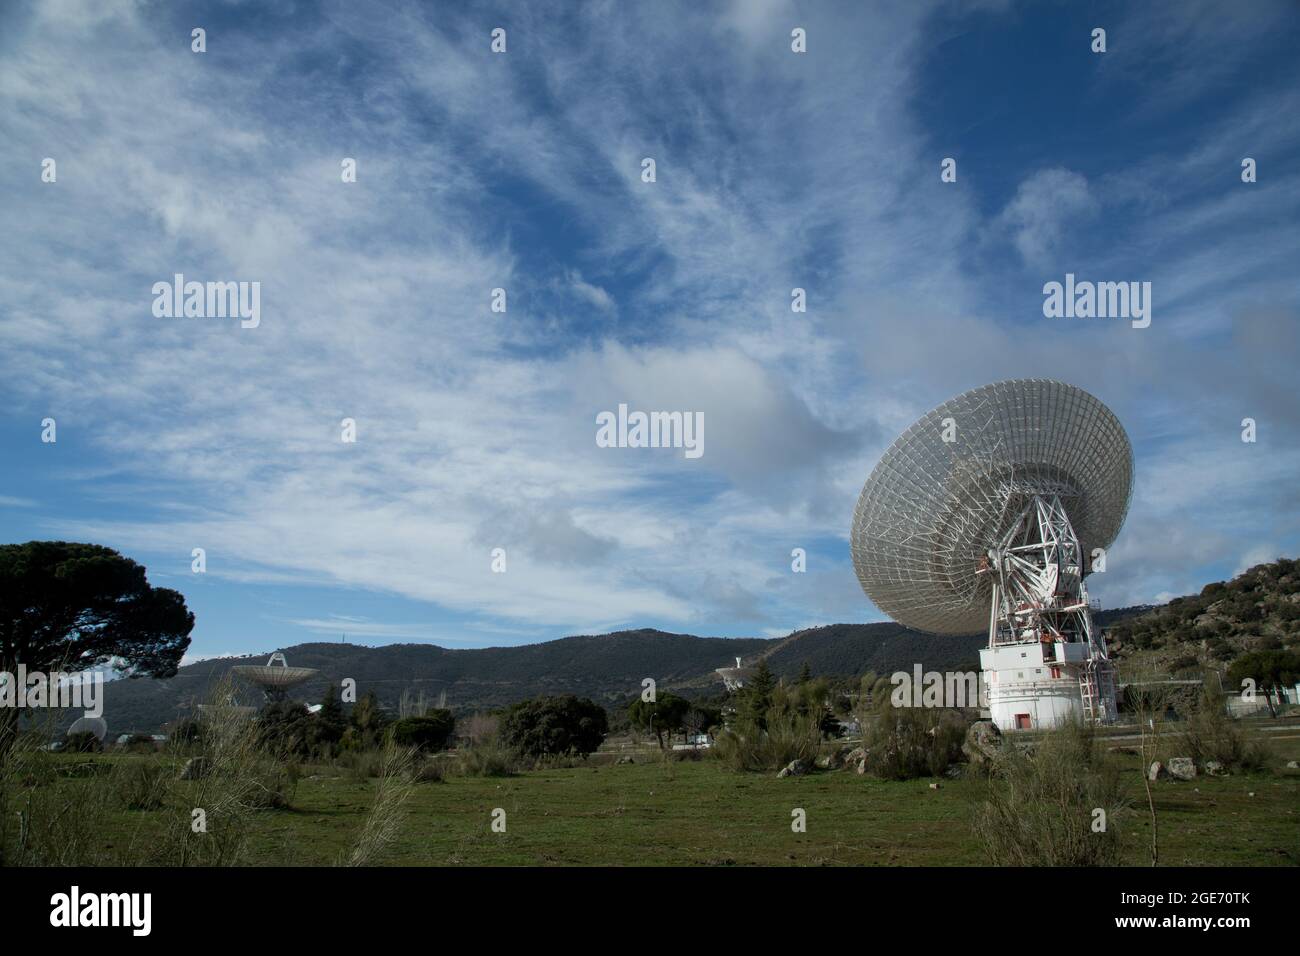 Giant radio telescopes located in valley between mountains with blue sky and clouds Stock Photo